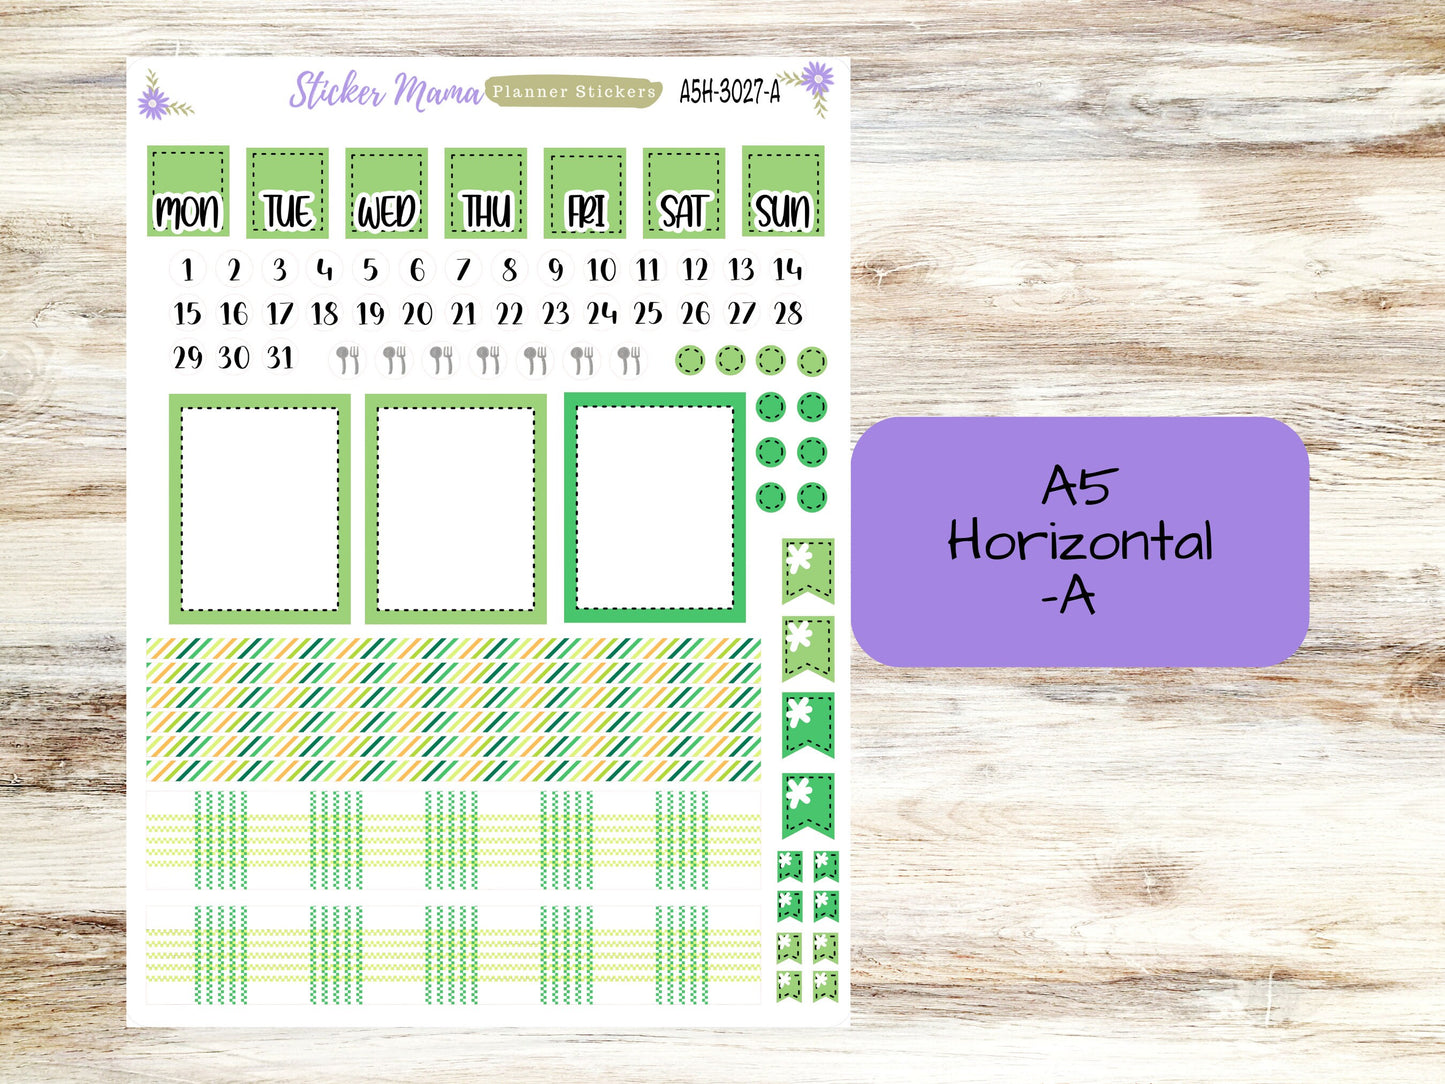 A5 Horizontal || #3027 || Lucky Irish || A5 Weekly Kit || Planner Stickers || Erin Condren A5 Horizontal Weekly Kit